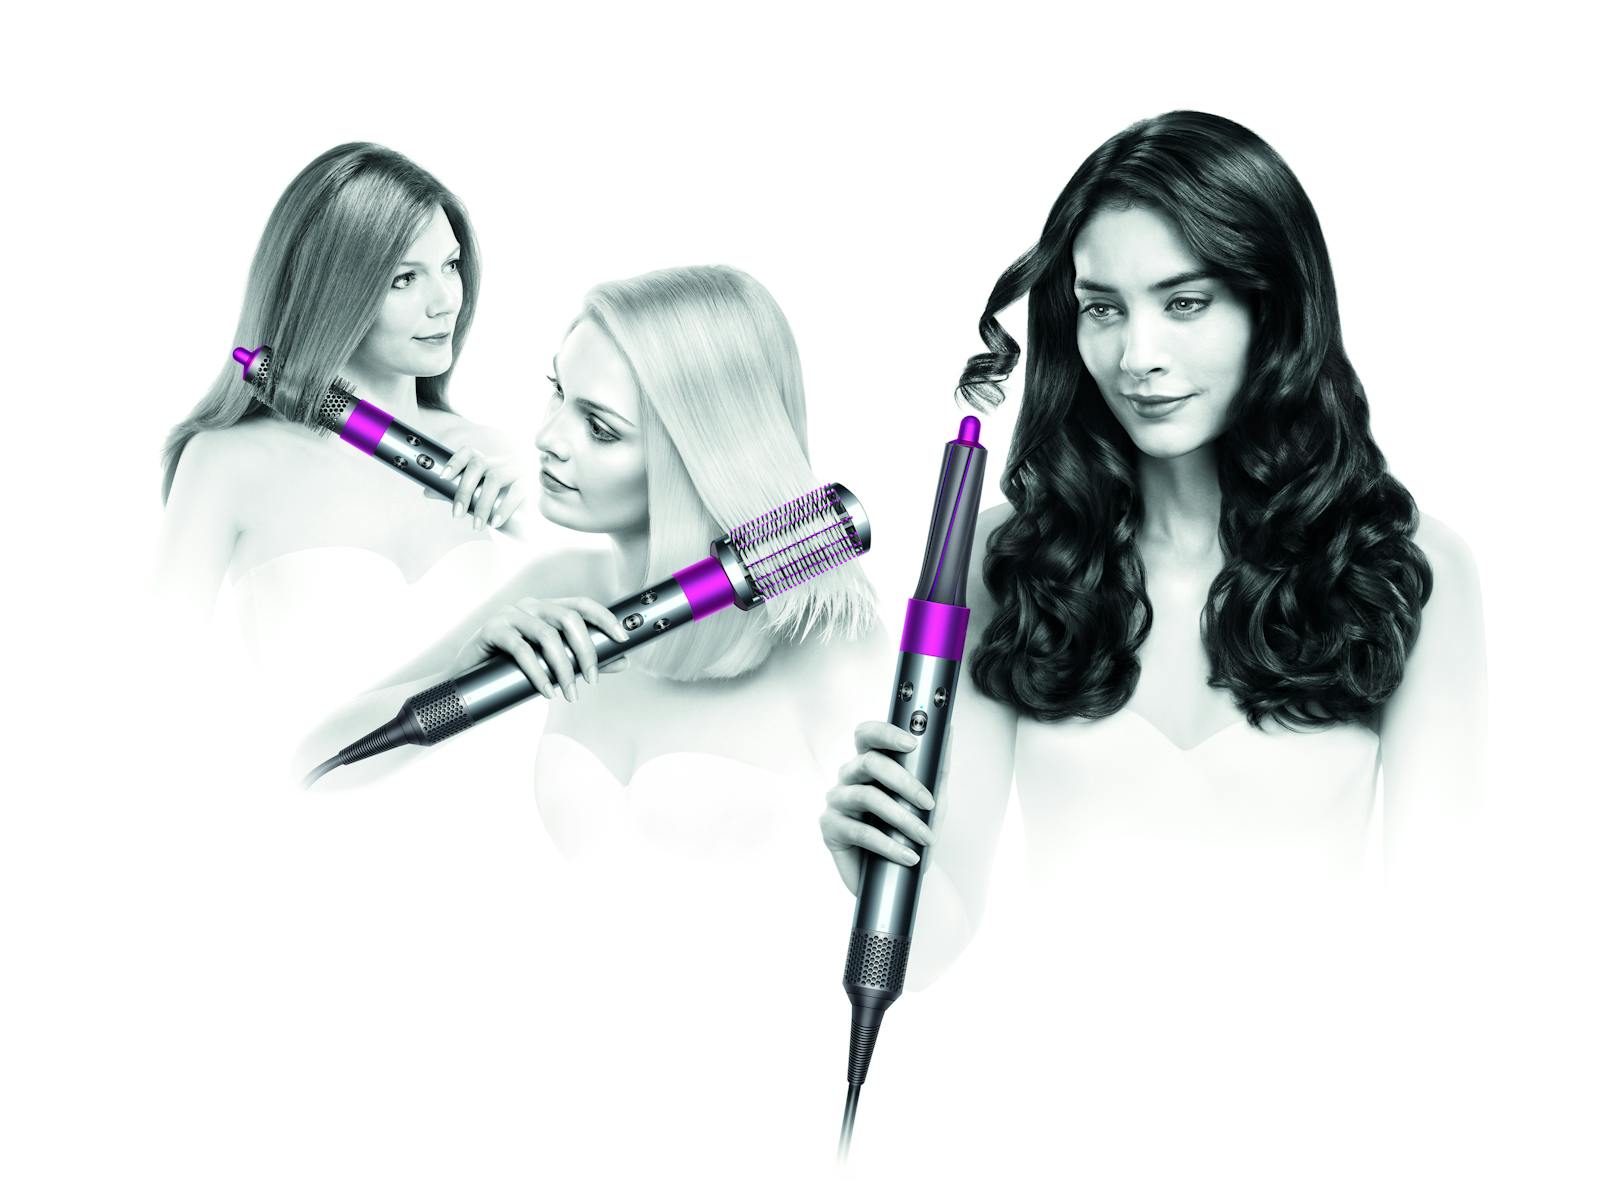 "Dyson Airwrap" im Test: Professionelles Haarstyling